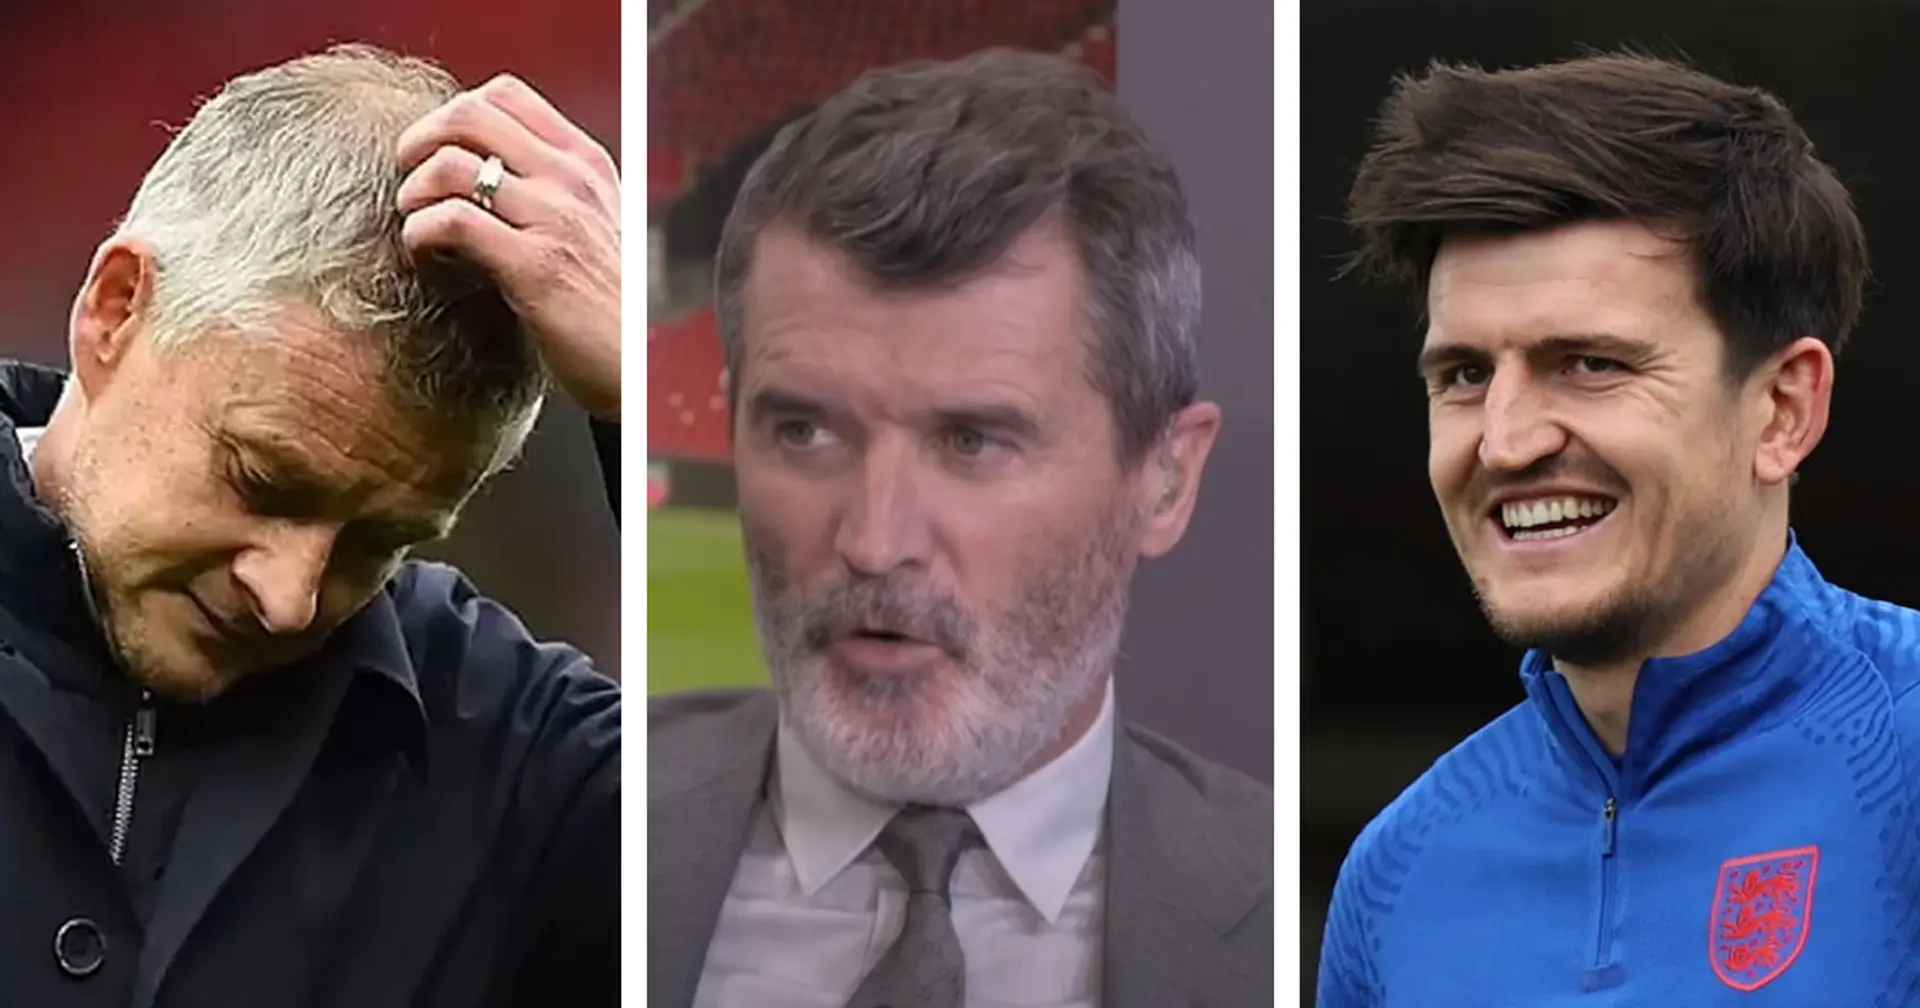 'He's too scared to call out his mate Ole': Roy Keane slammed for criticism of Maguire